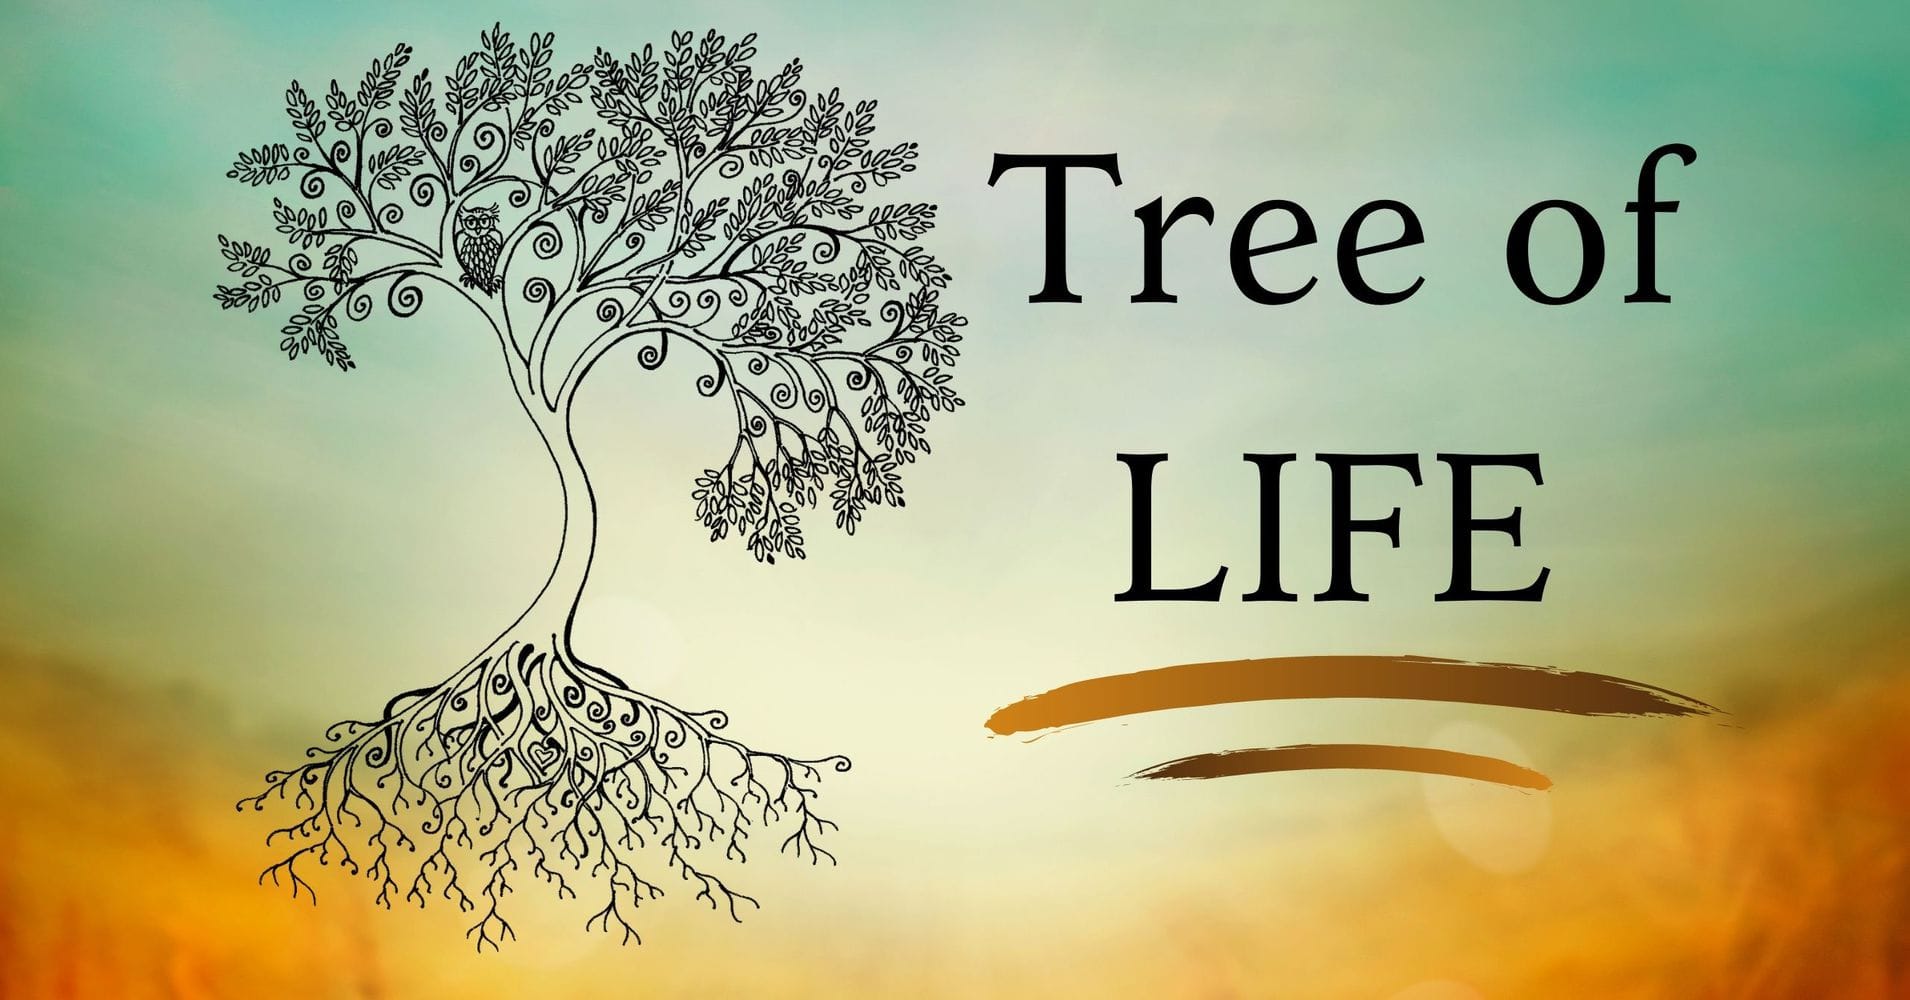 Featured image for “Tree of Life”